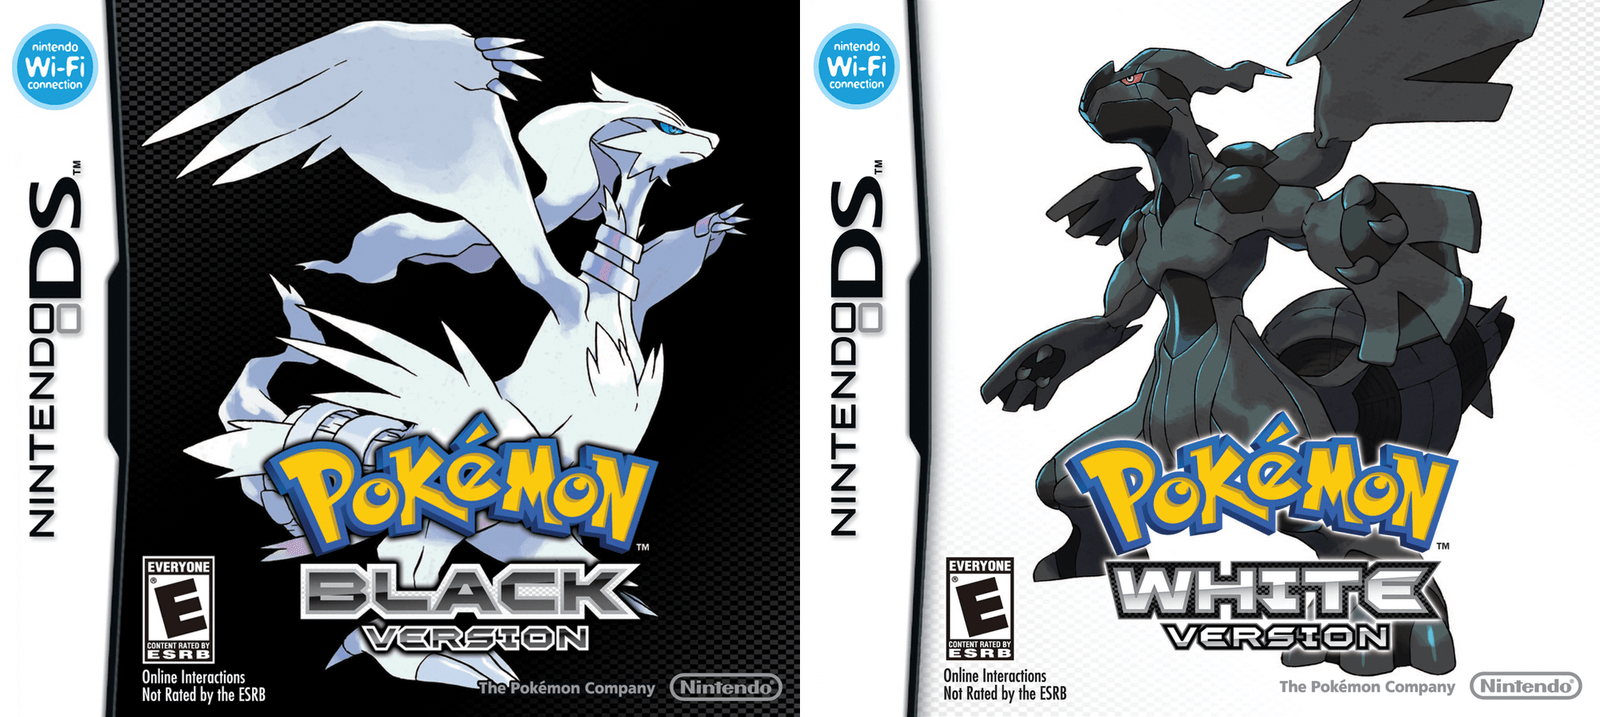 OK, this is the point where I can't even name the Pokemon on the cover anymore.